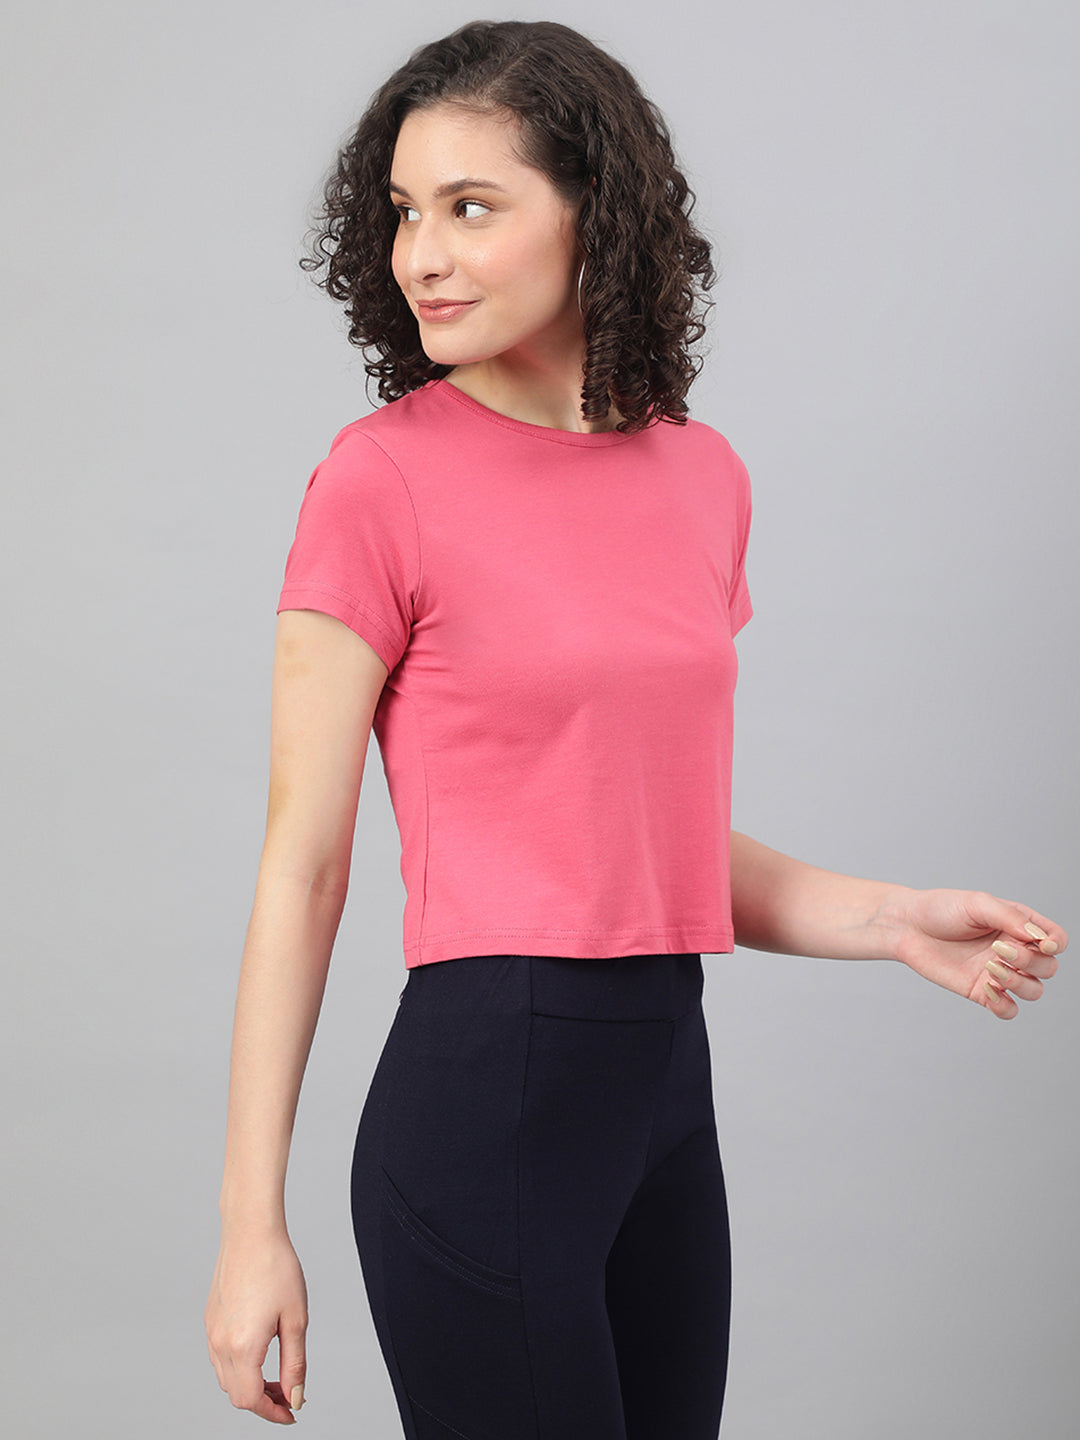 Supima Cotton Rose Color T-shirts for women - BeSimple